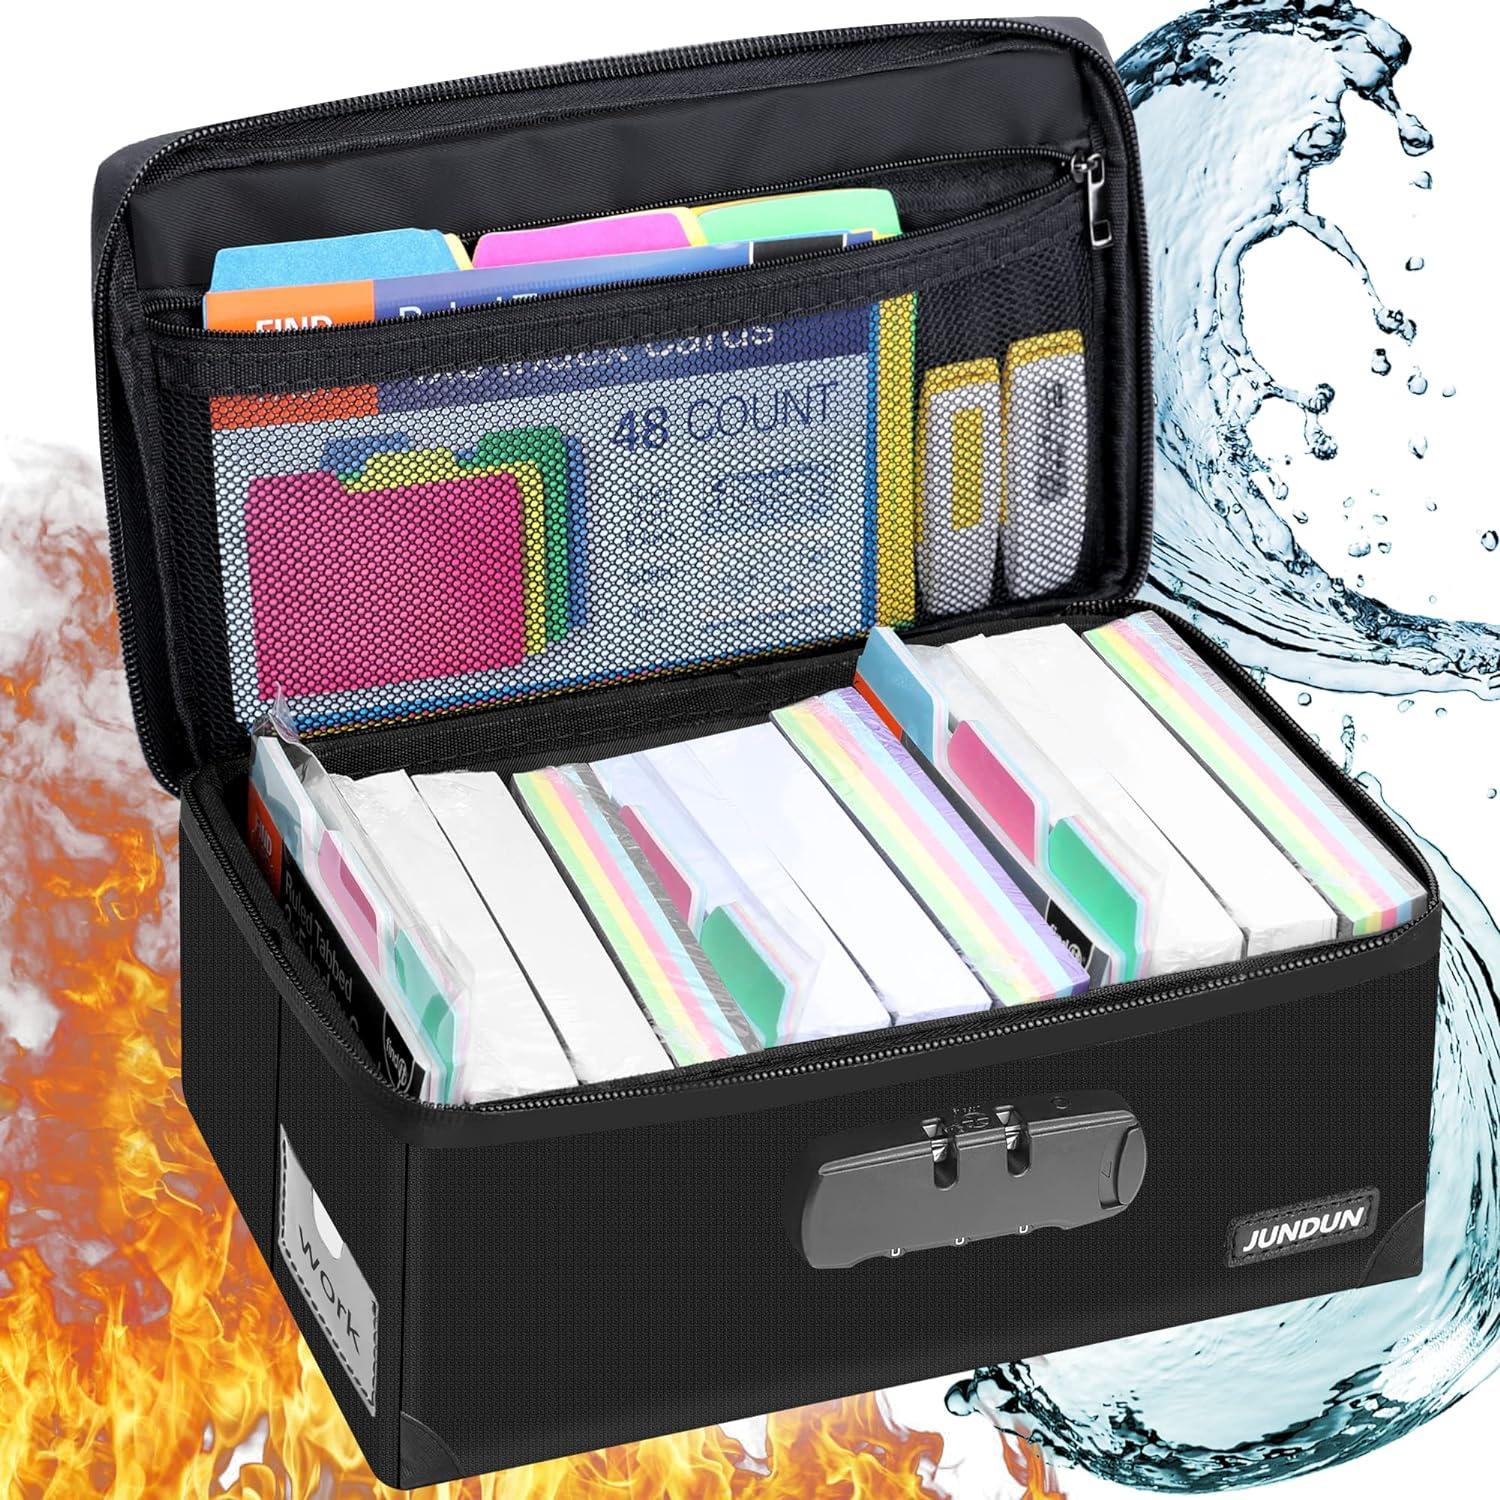 index card box with lock collapsible fireproof index card holder fits 1200 pieces 5x3  jundun b0bwyd1q8p